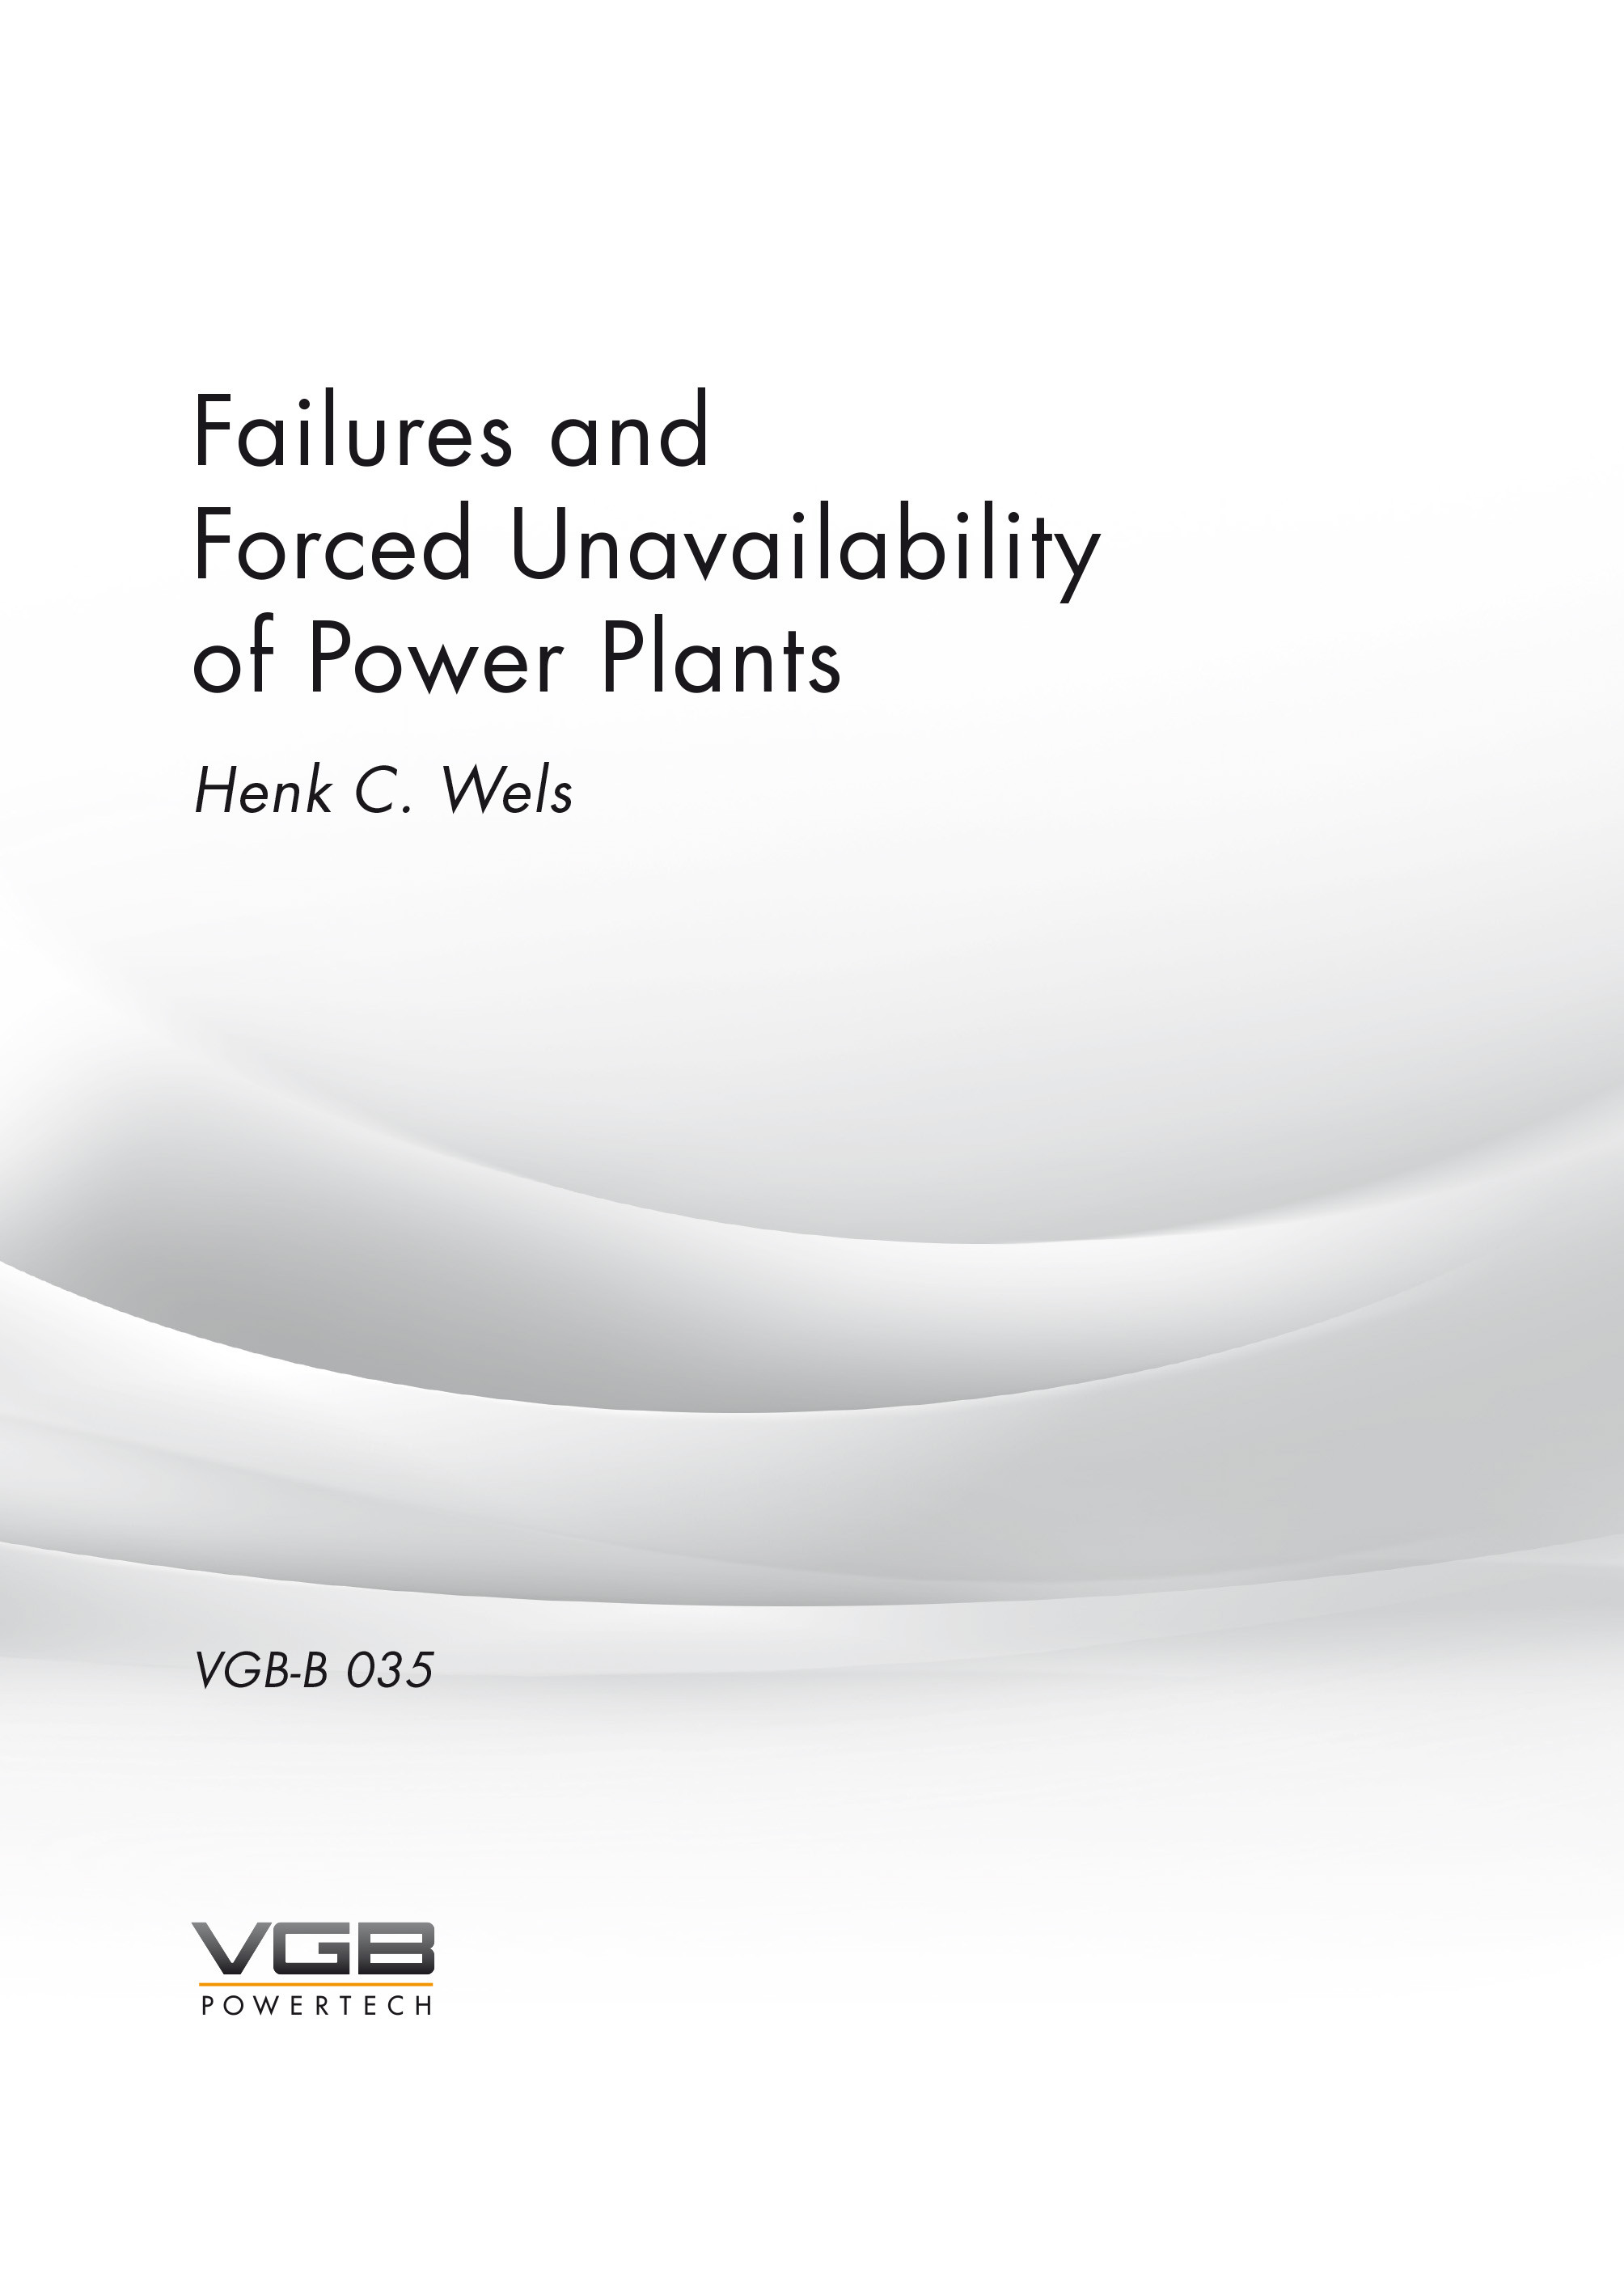 Failures and Forced Unavailability of Power Plants (Henk C. Wels)